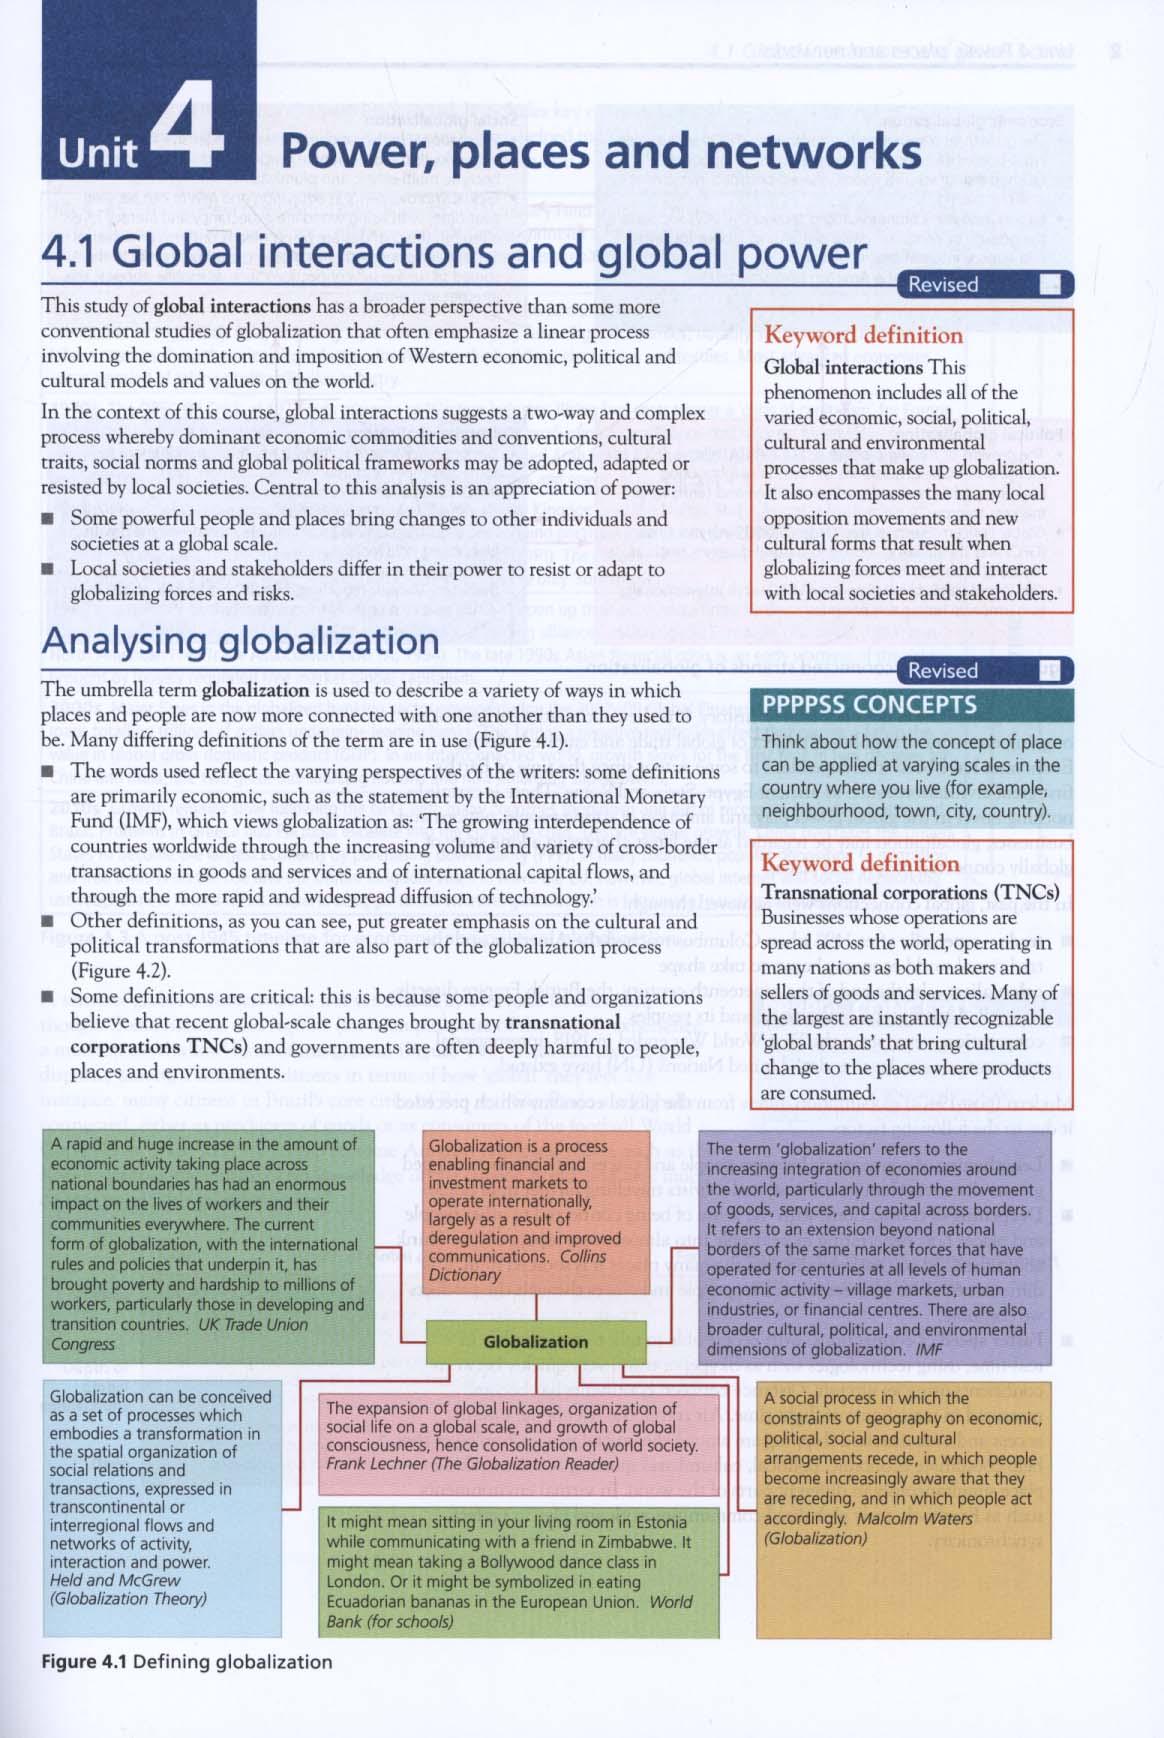 Geography for the Ib Diploma Study and Revision Guide HL Cor